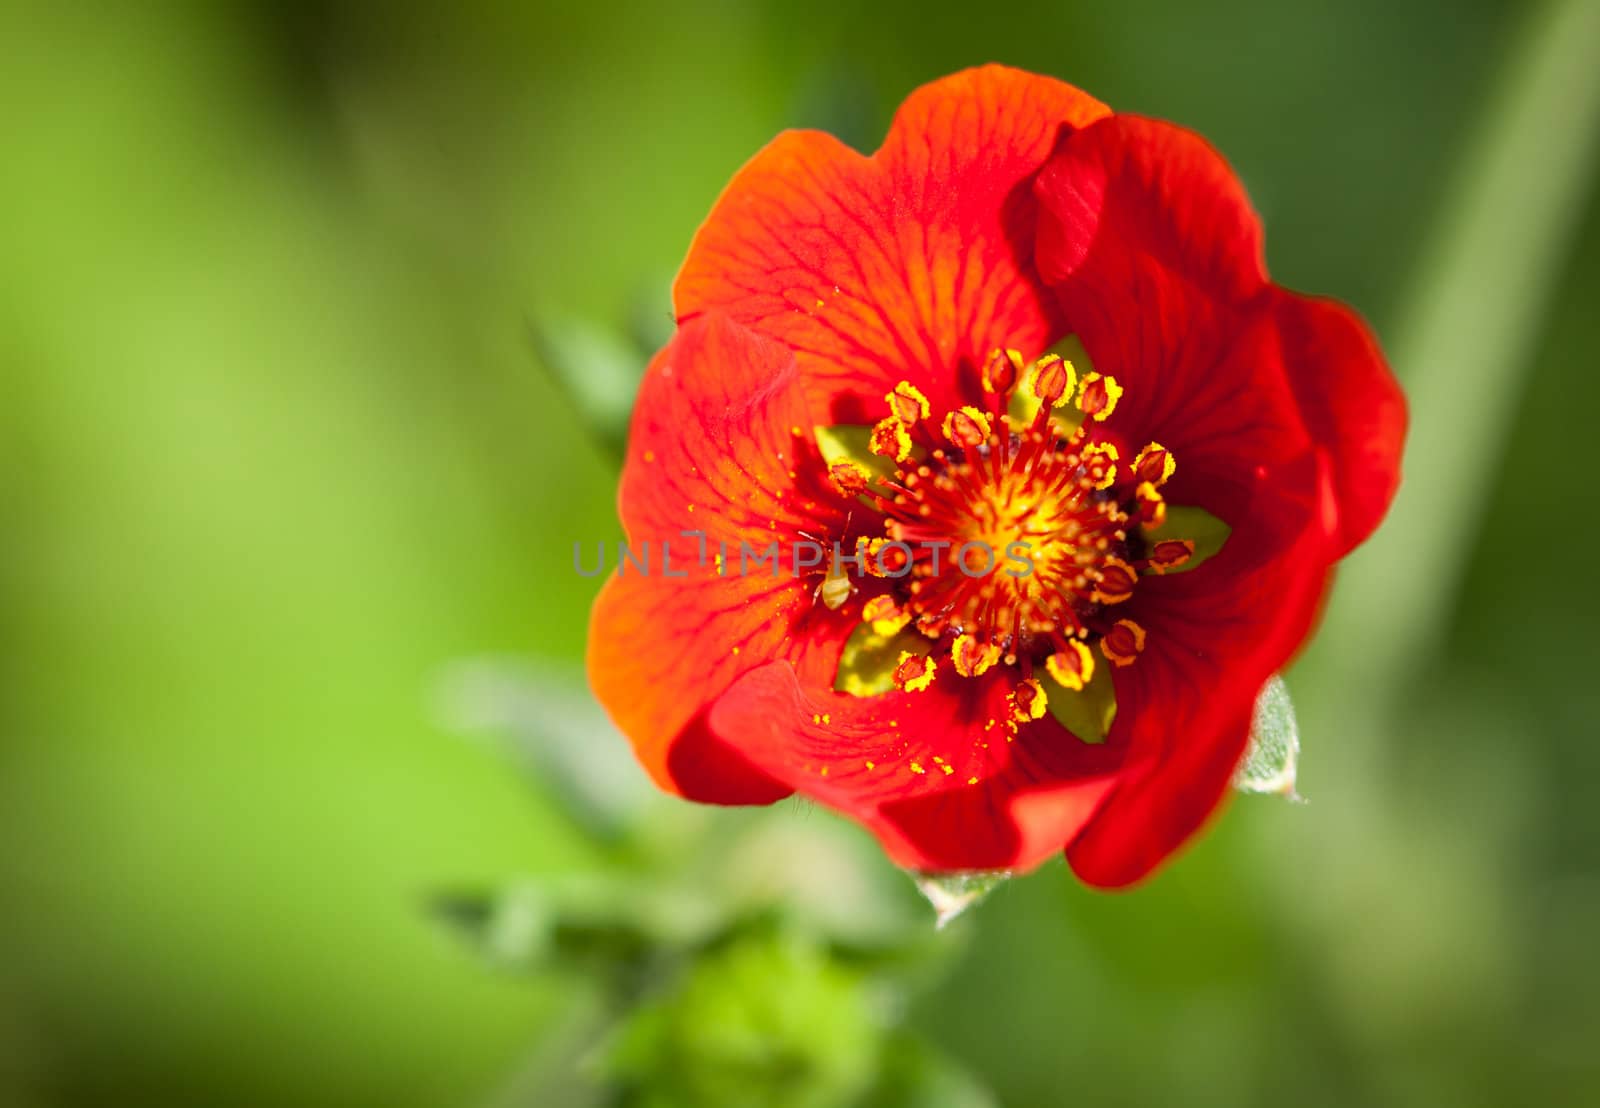 CLose-up shot of a beautiful vibrant red Poppy flower in a green field